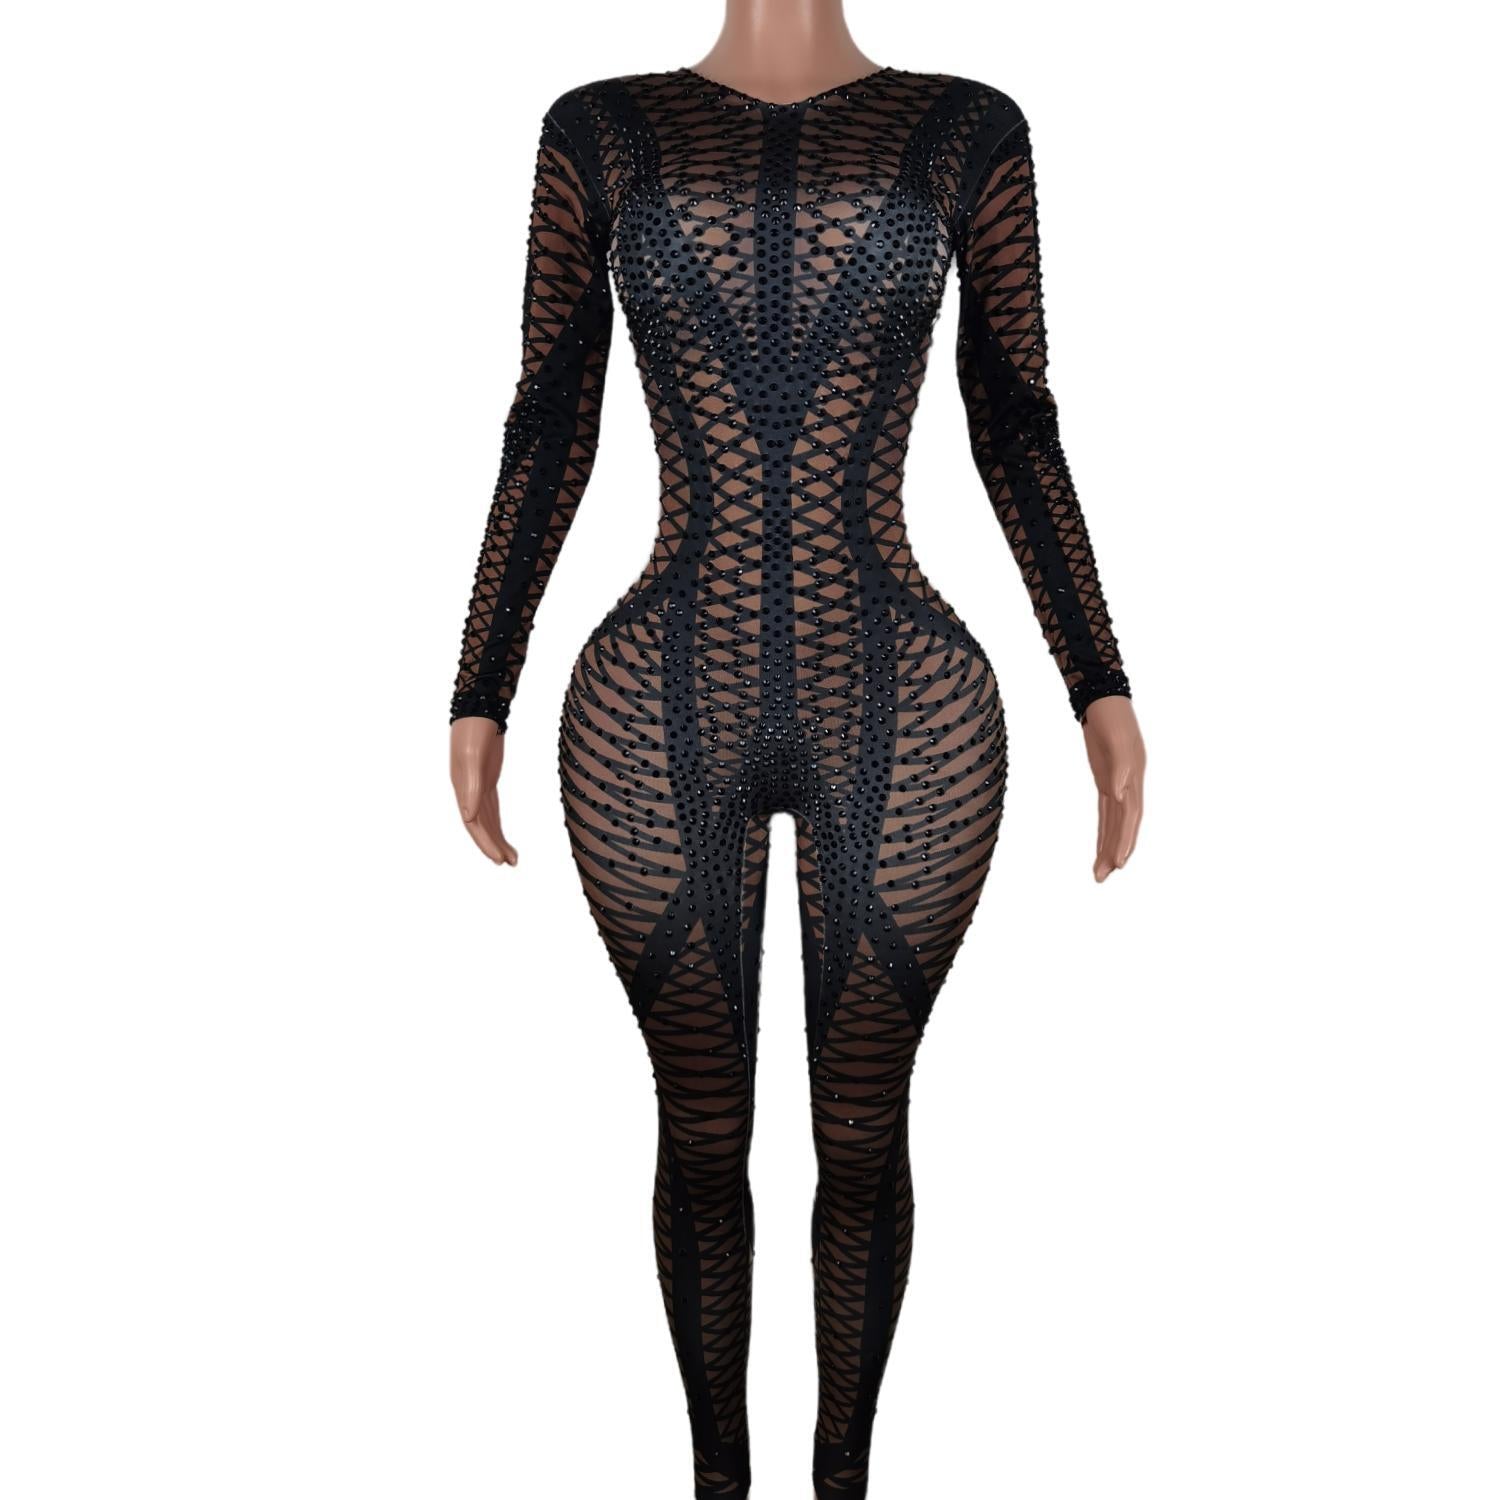 Sexy Geometric Patterns Jumpsuit Woman Sparkly Stones Bodysuit Stage Wear Celebrate Female Singer Crystals Costume Outfit